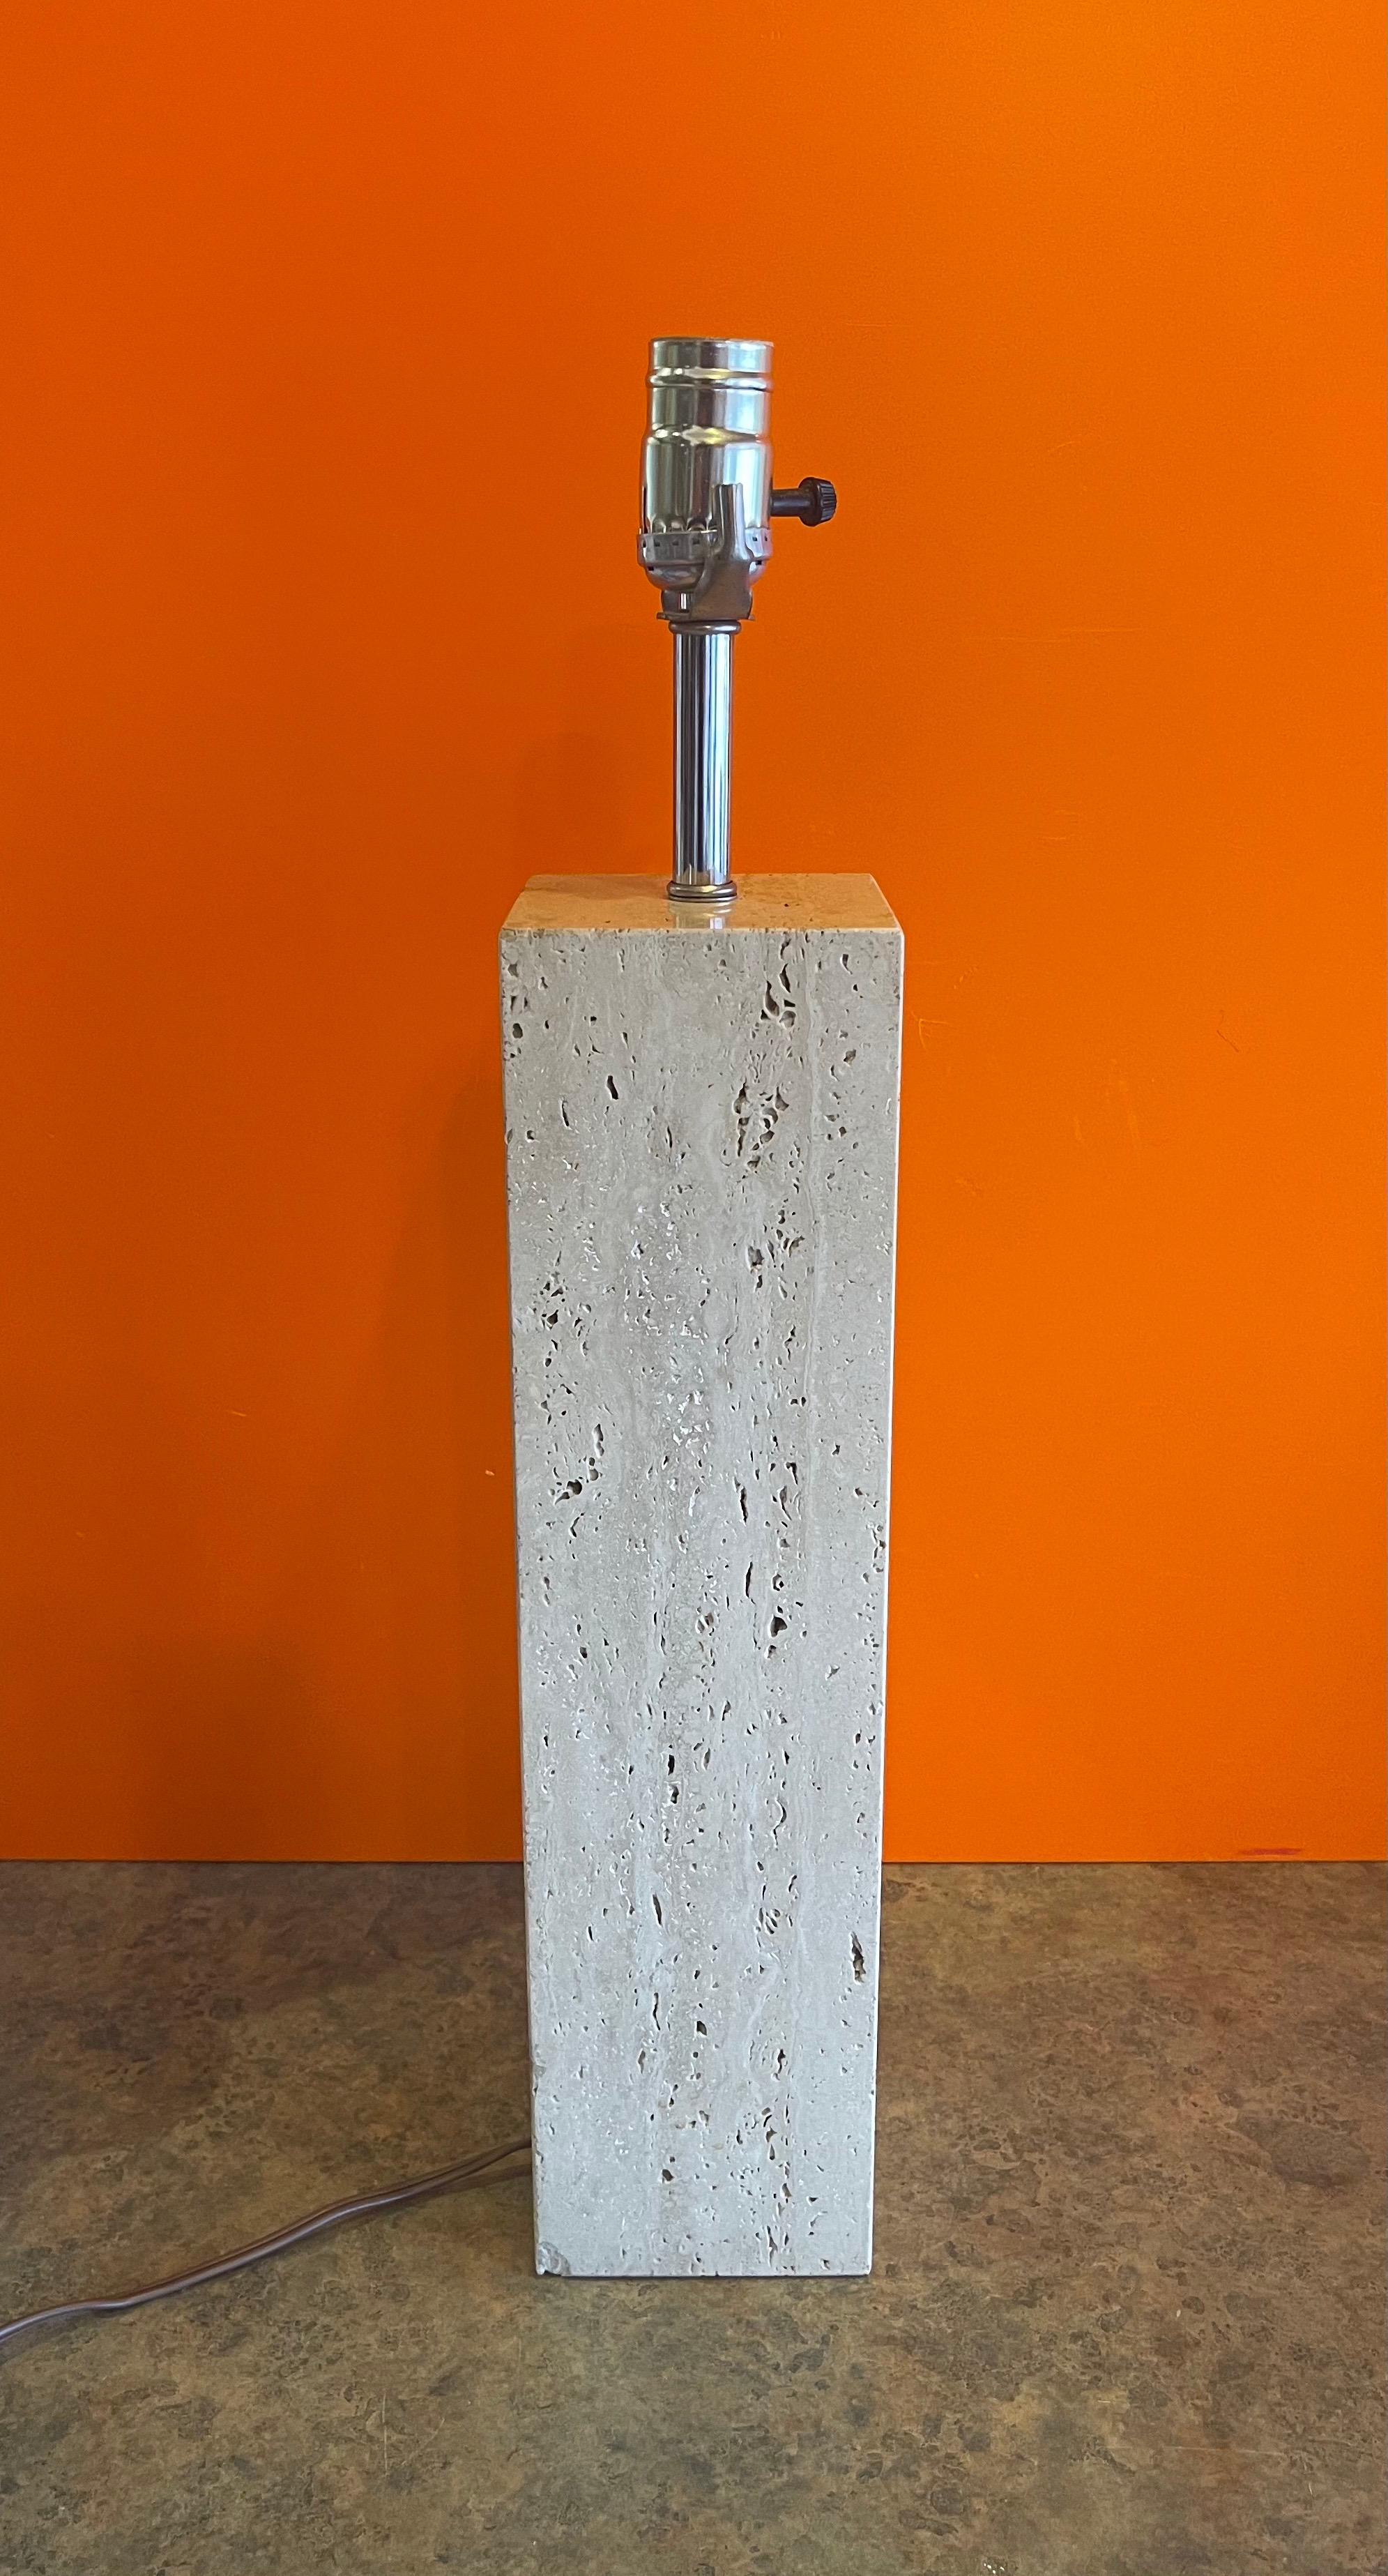 Postmodern Italian solid travertine table lamp, circa 1980s. The lamp is in good vintage condition and the travertine base measures 4